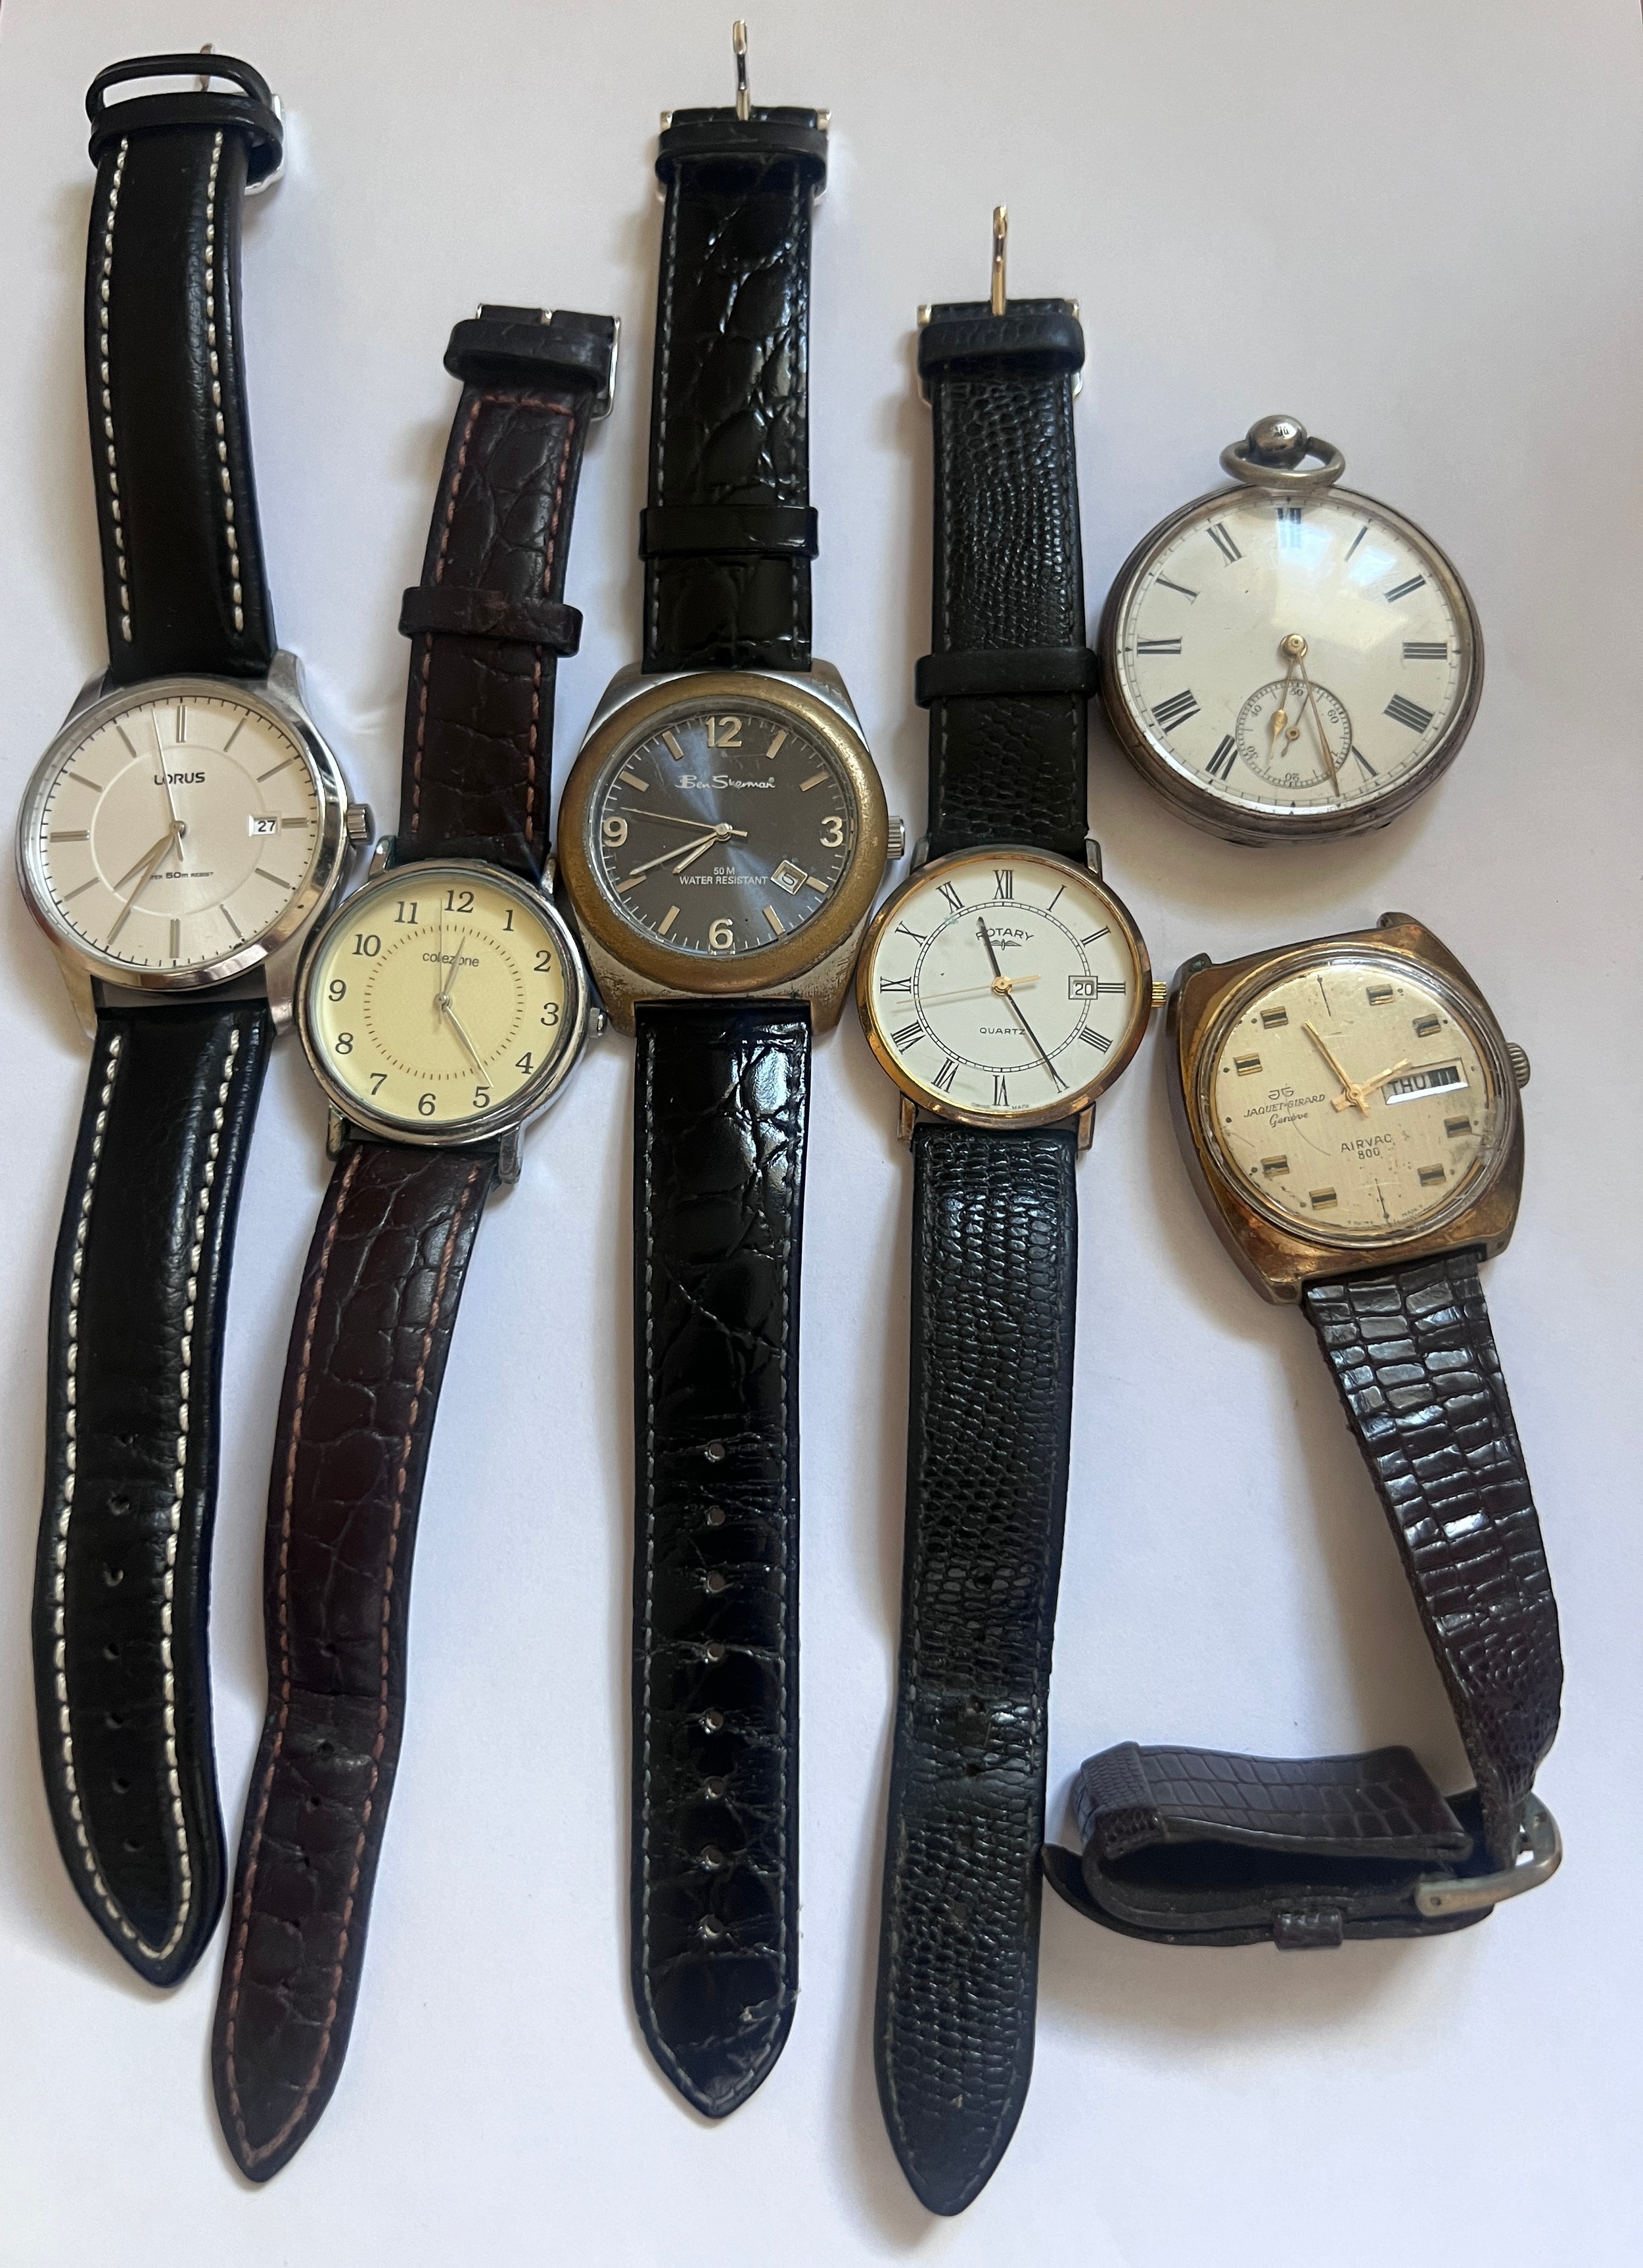 A collection of watches to include Lorus, Collezione, Ben Sherman, Jaquet-Girard, Rotary and a